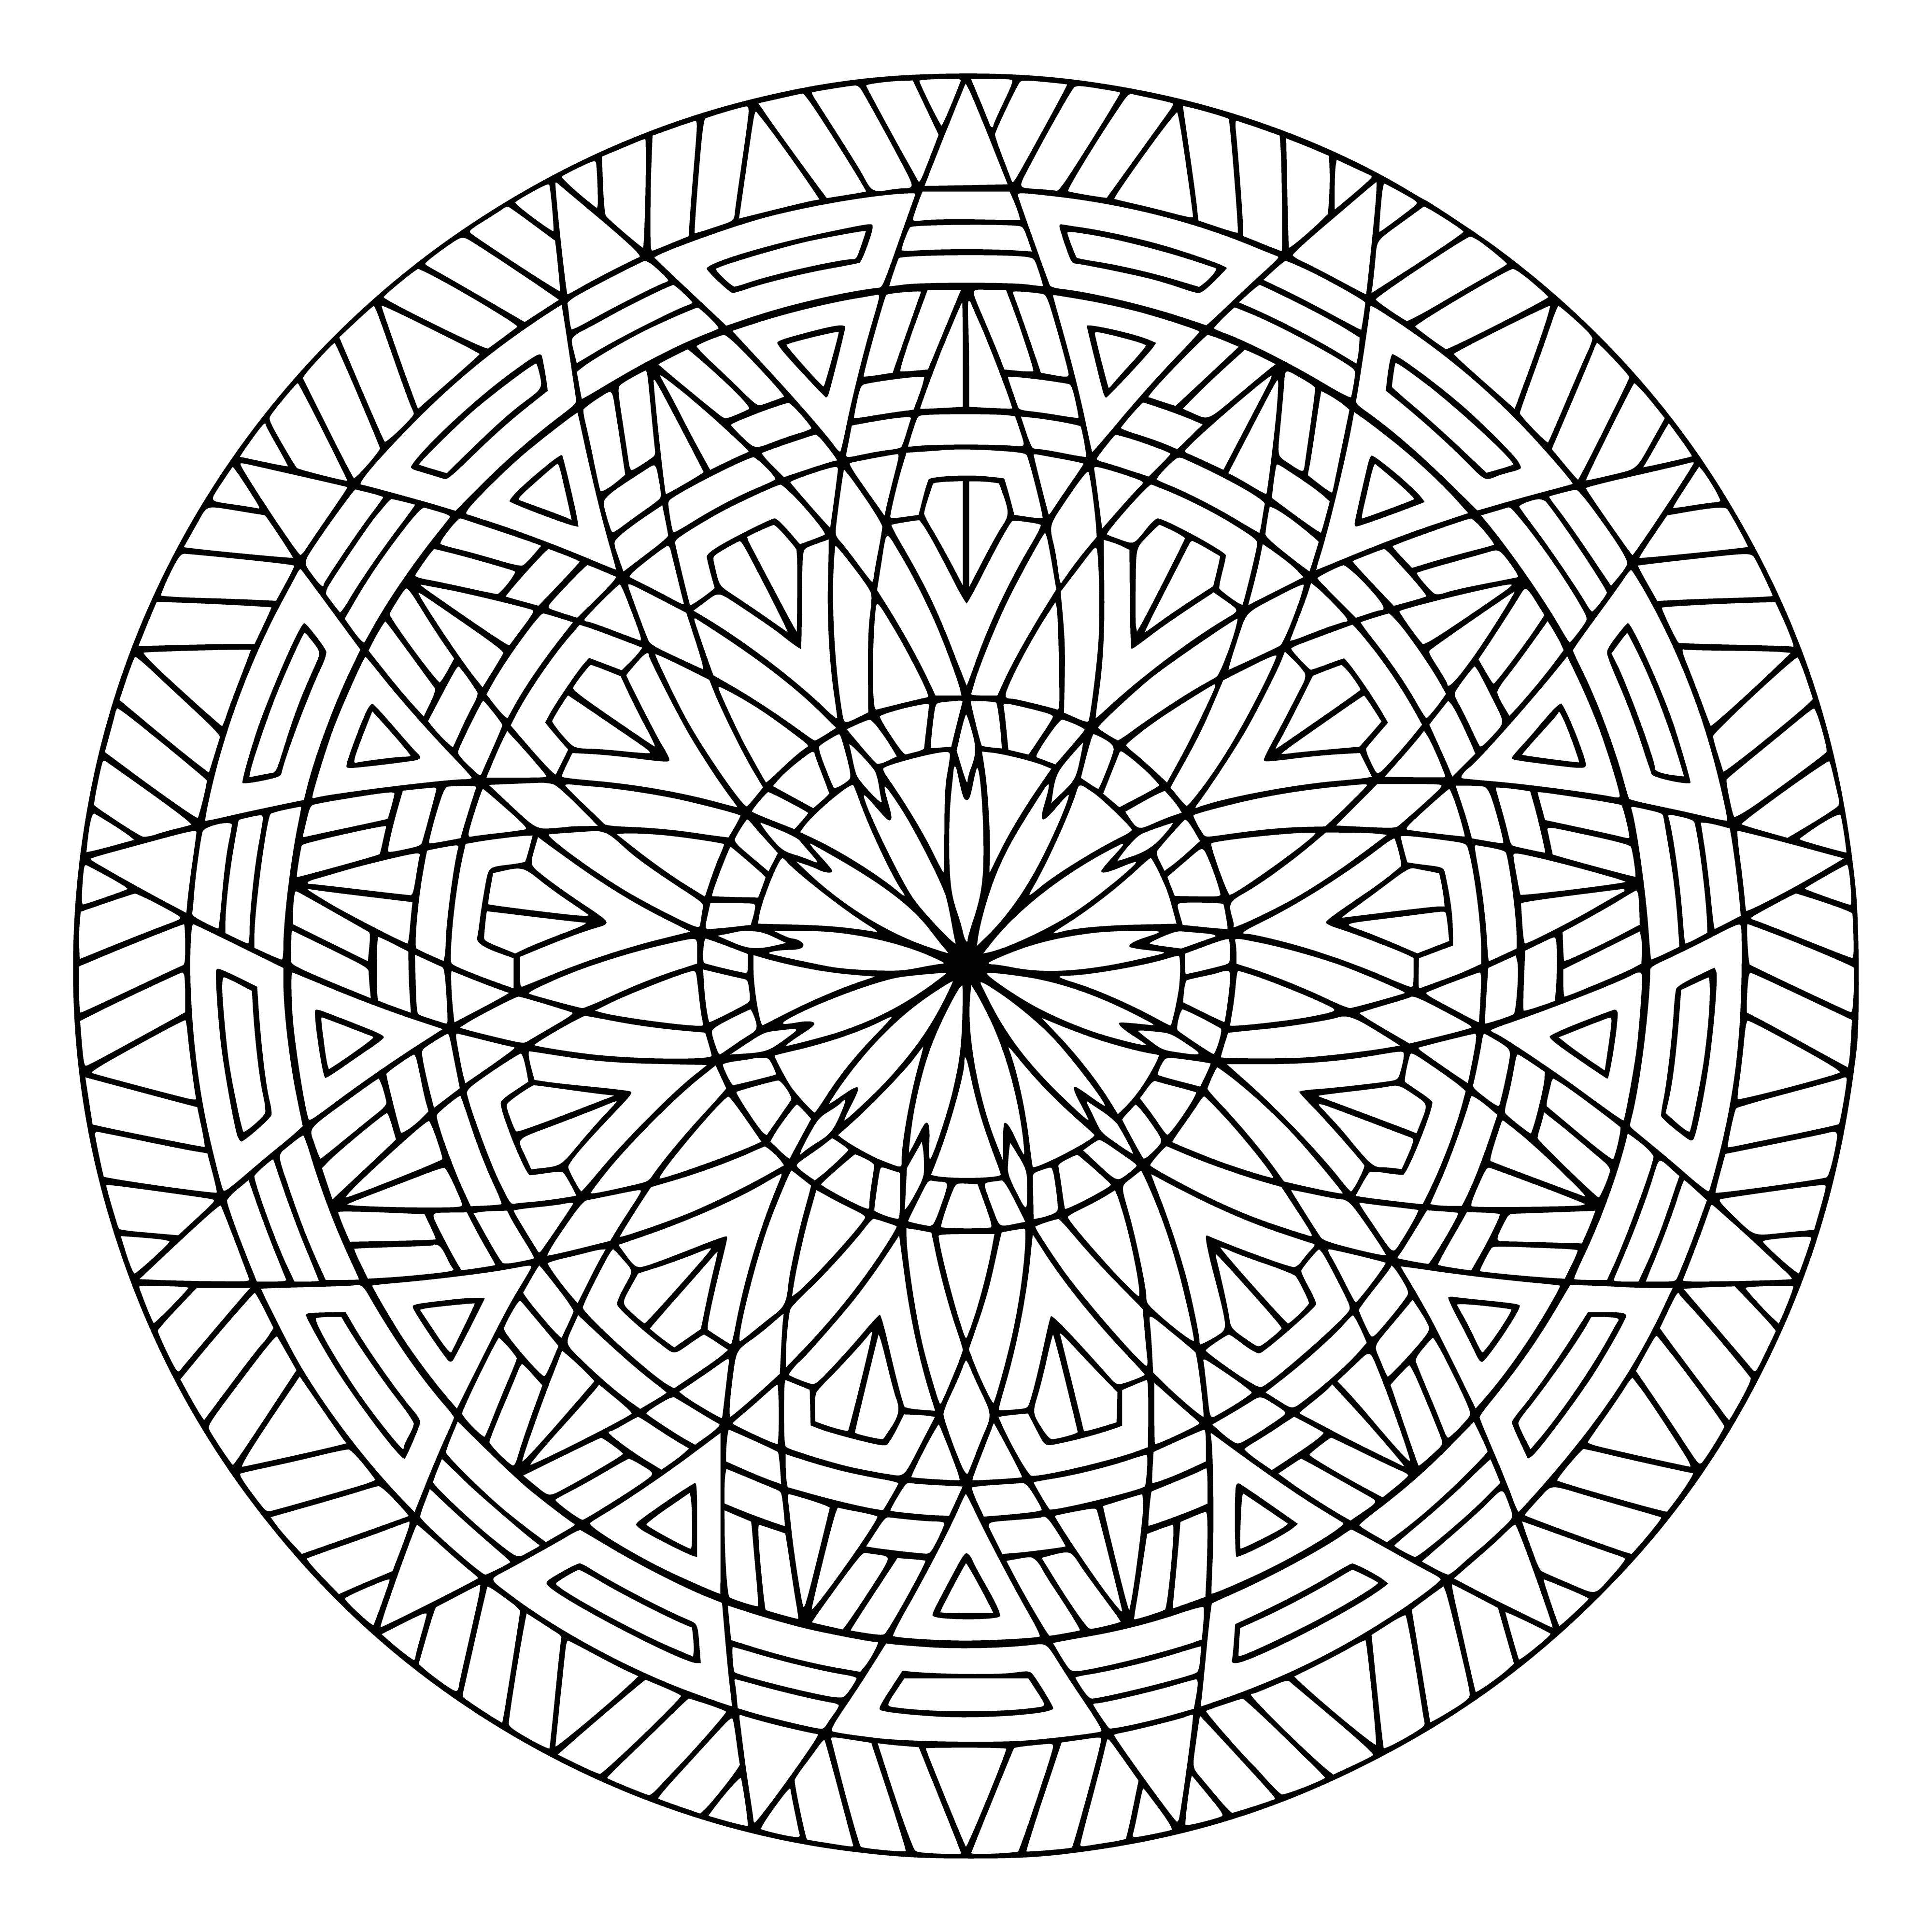 coloring page: In the middle of a mandala there's a big shape surrounded by smaller shapes & patterns in a range of colors.